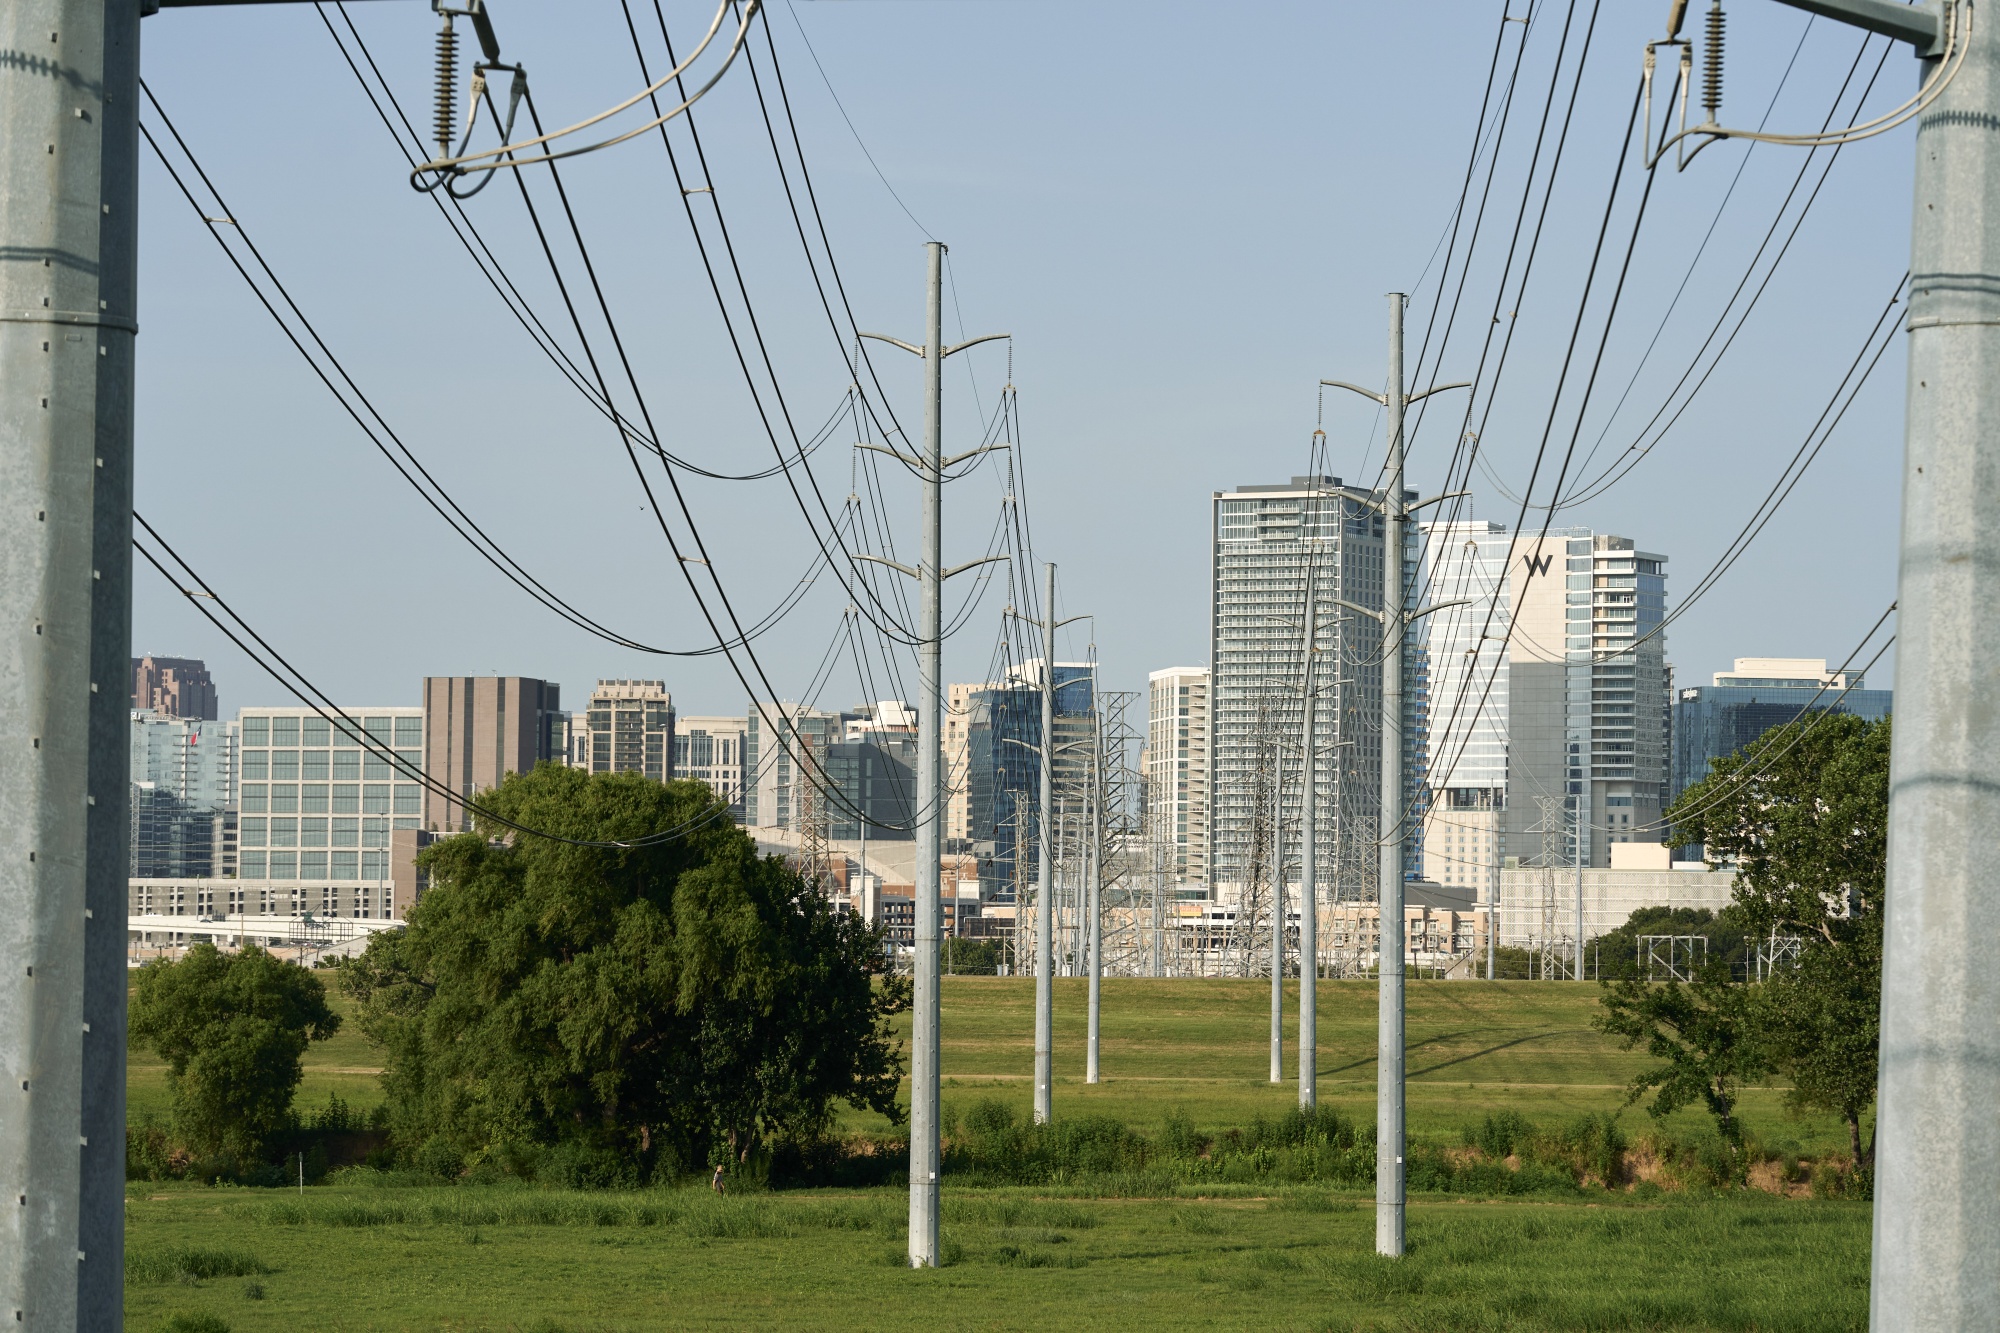 Electrical lines in Dallas, Texas.